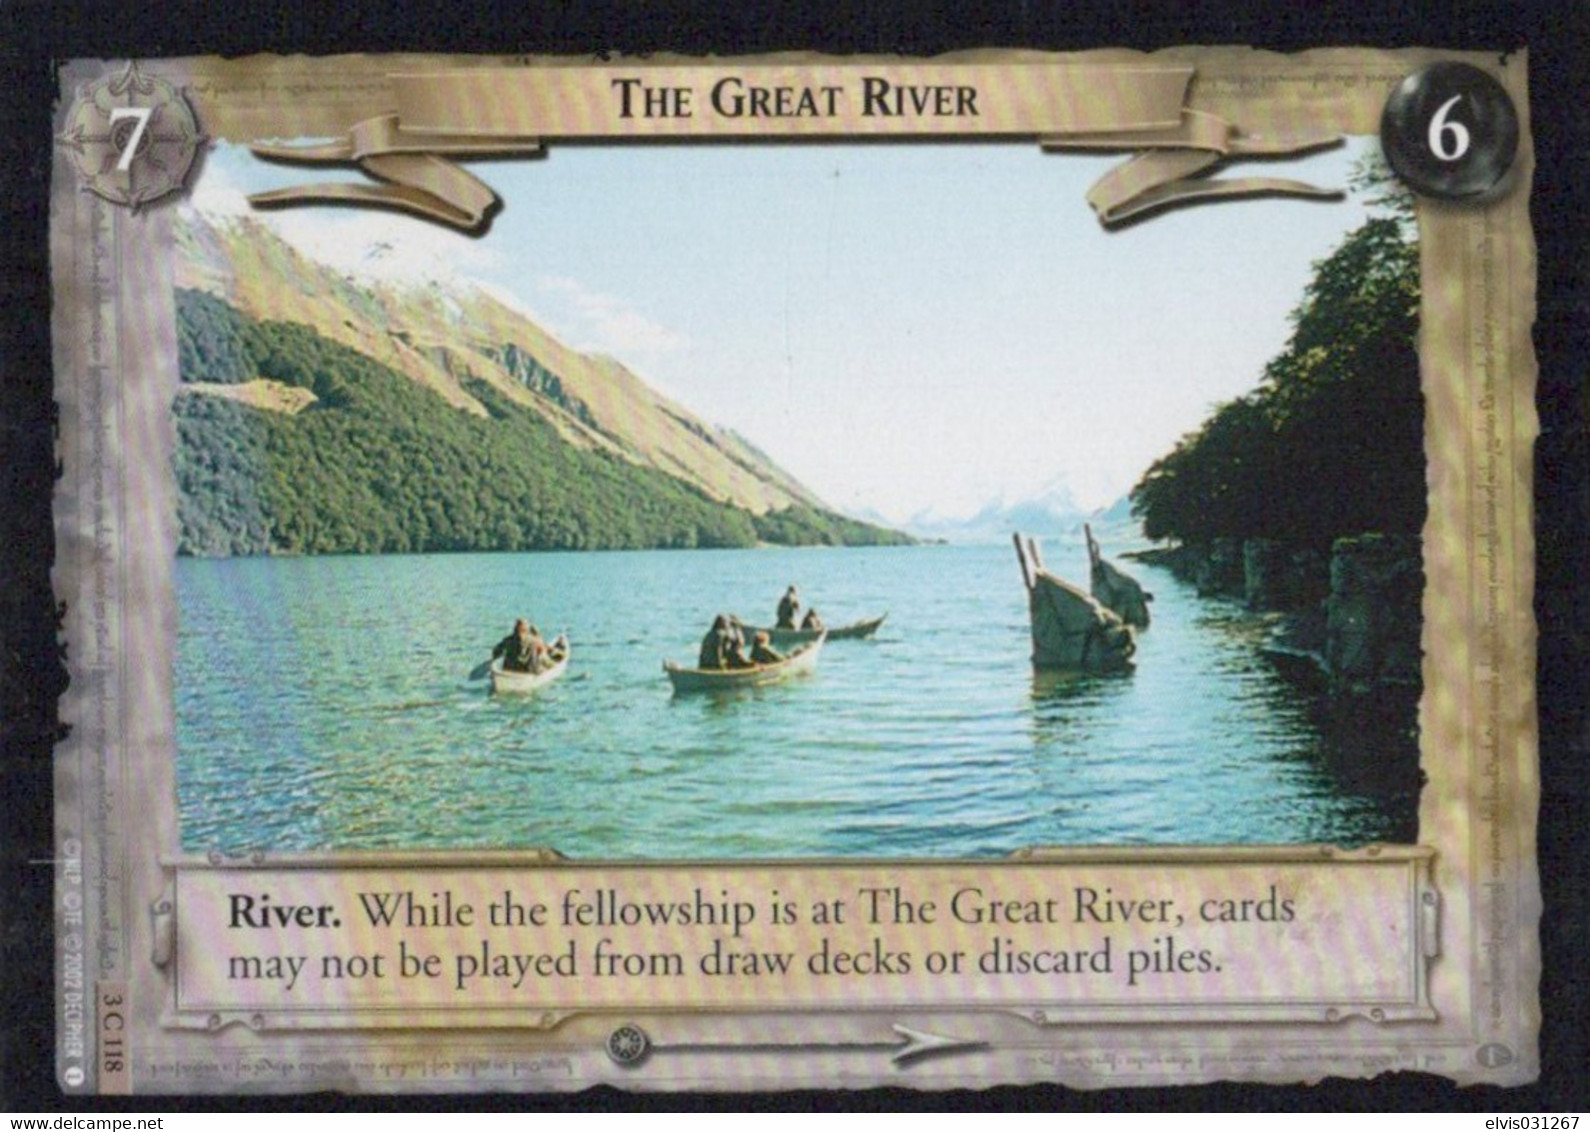 Vintage The Lord Of The Rings: #6-7 The Great River - EN - 2001-2004 - Mint Condition - Trading Card Game - Lord Of The Rings